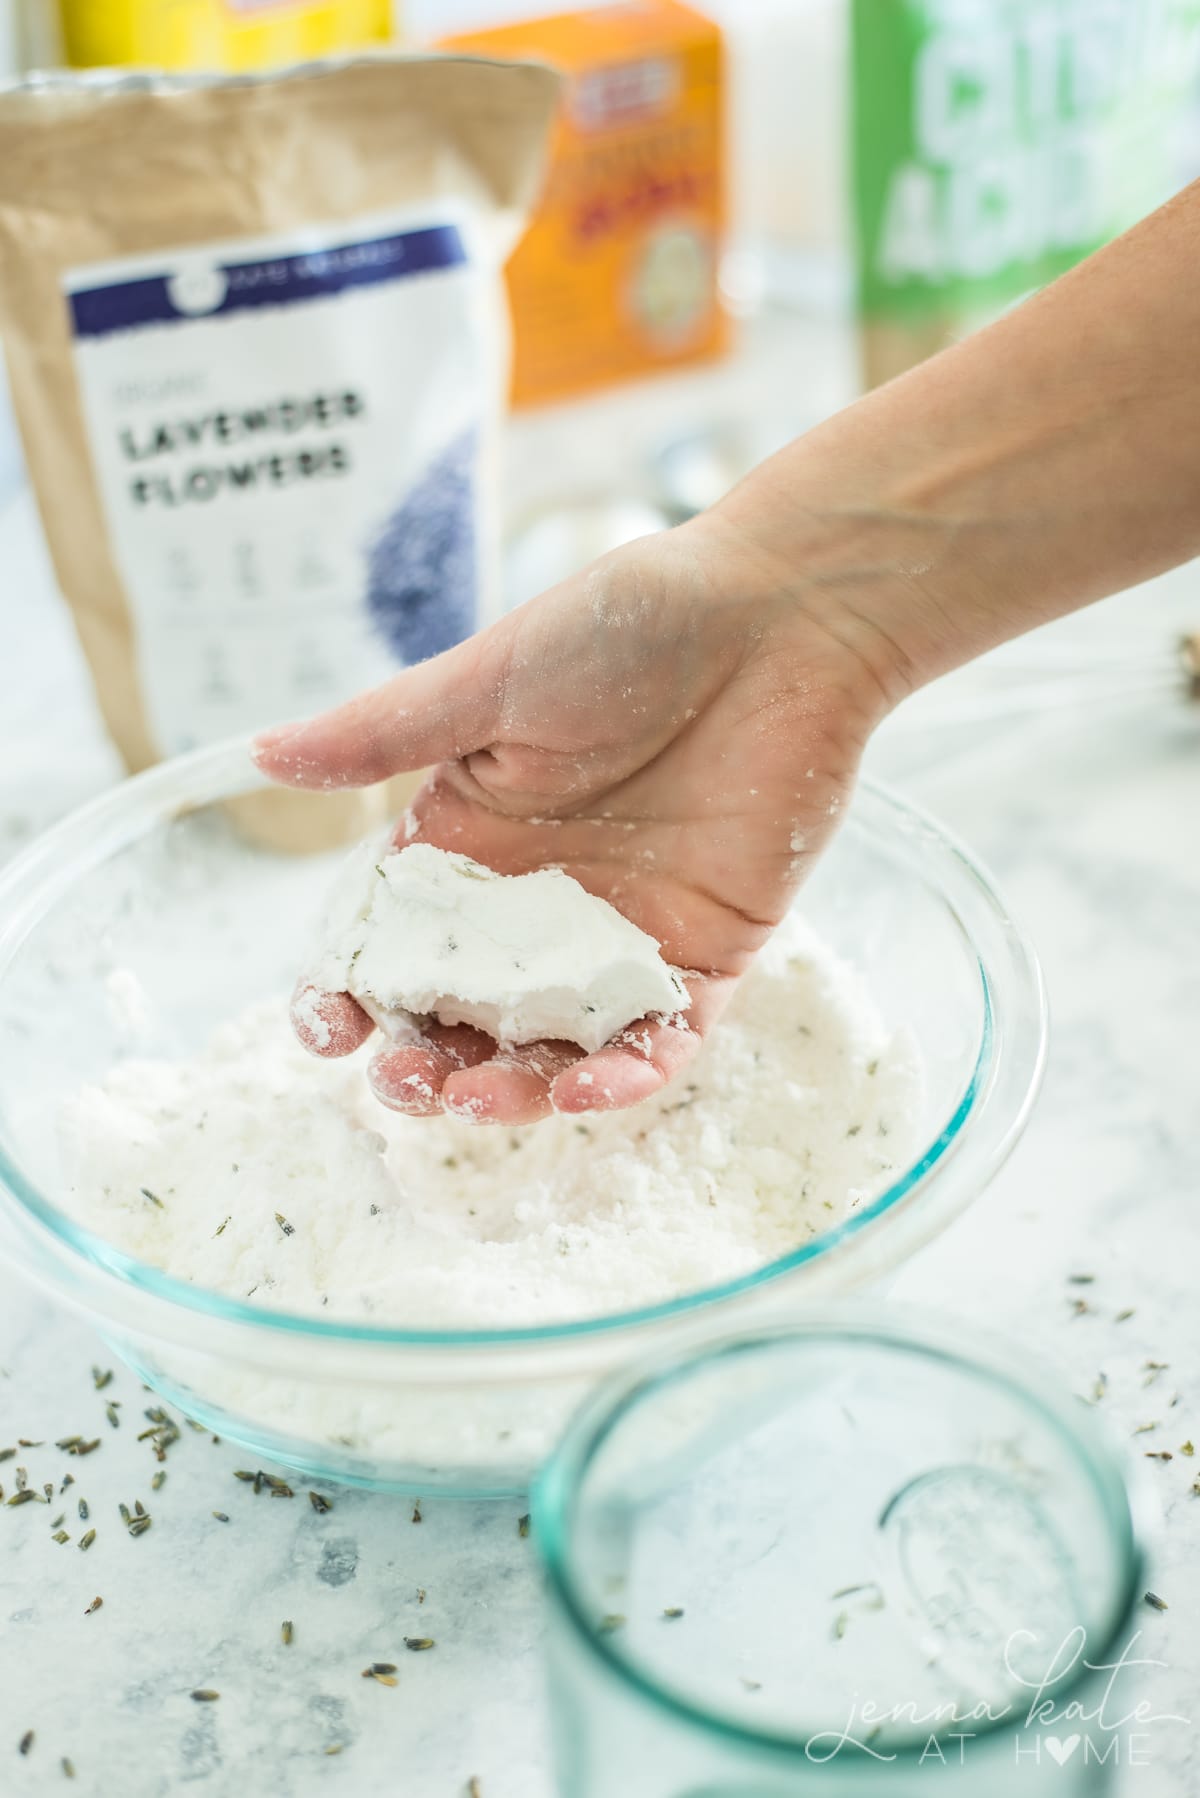 Holding a small amount of the finished mixture in your hands to show the right consistency - damp, not wet or crumbly.